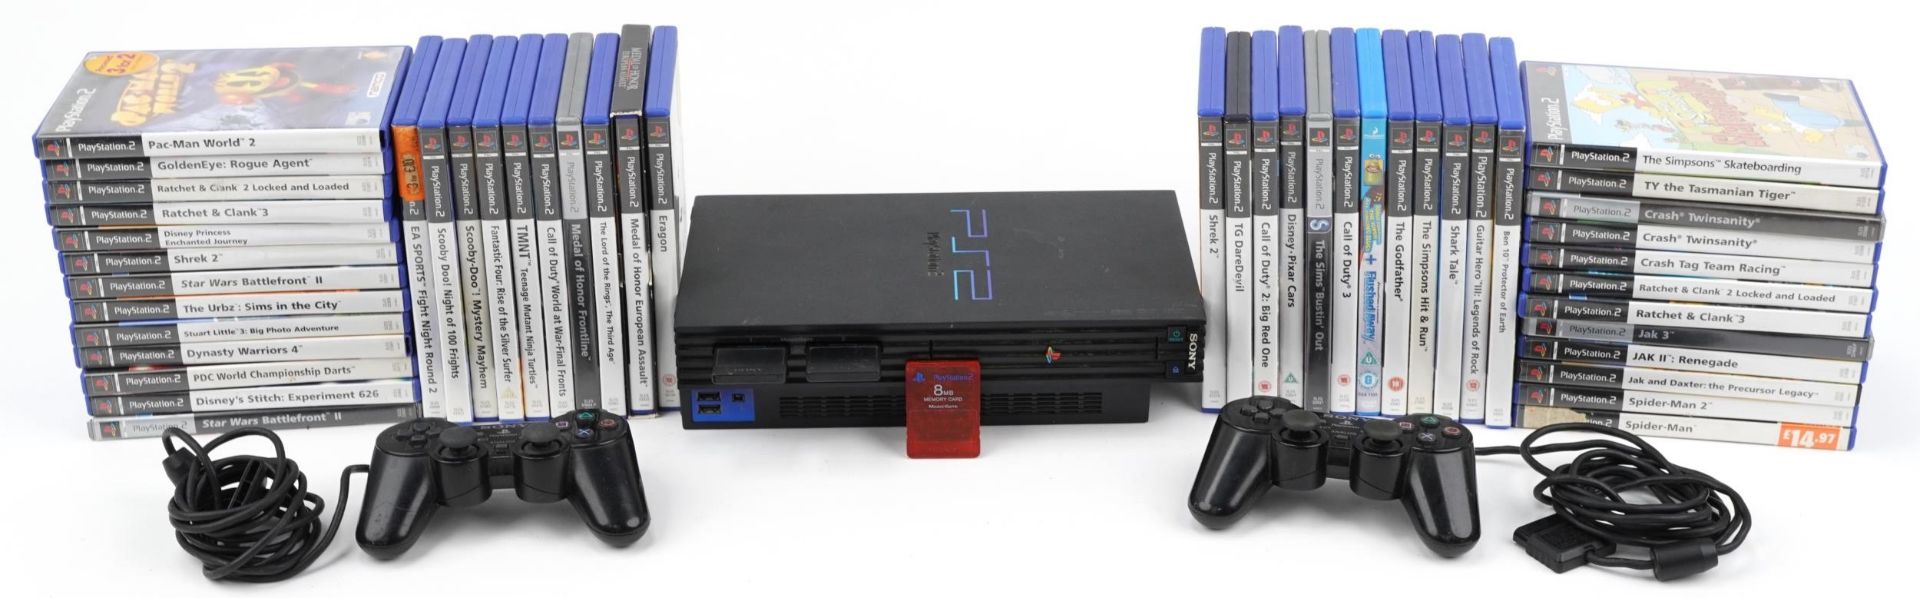 Sony PlayStation 2 games console with a large collection of games : For further information on